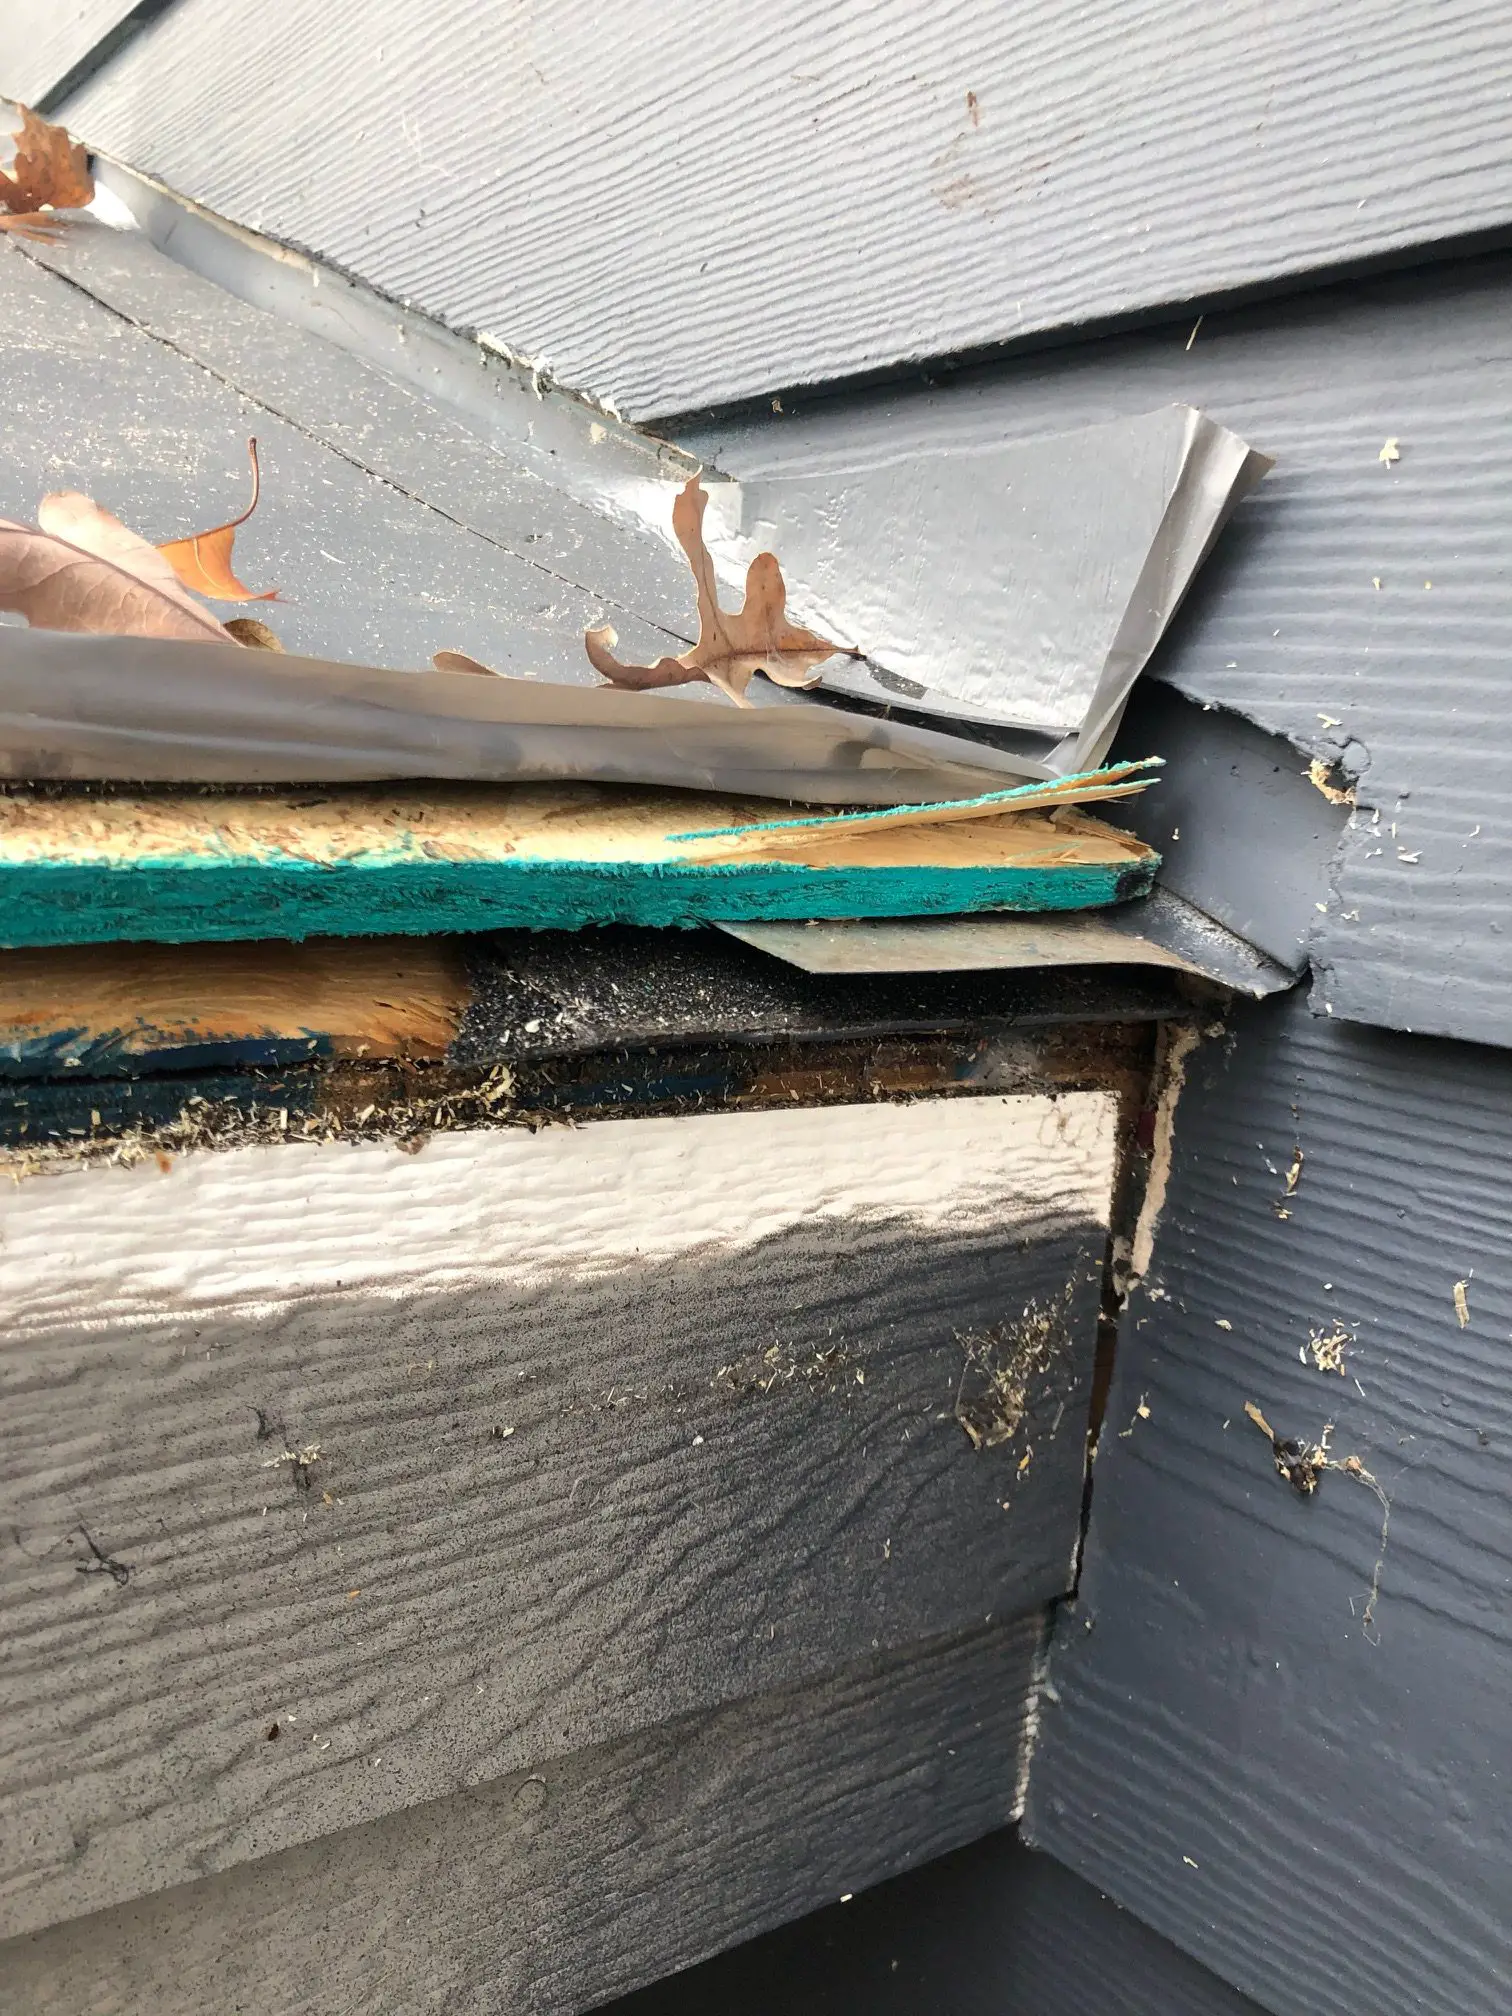 sheathing: " The contractor has installed new osb over the ...